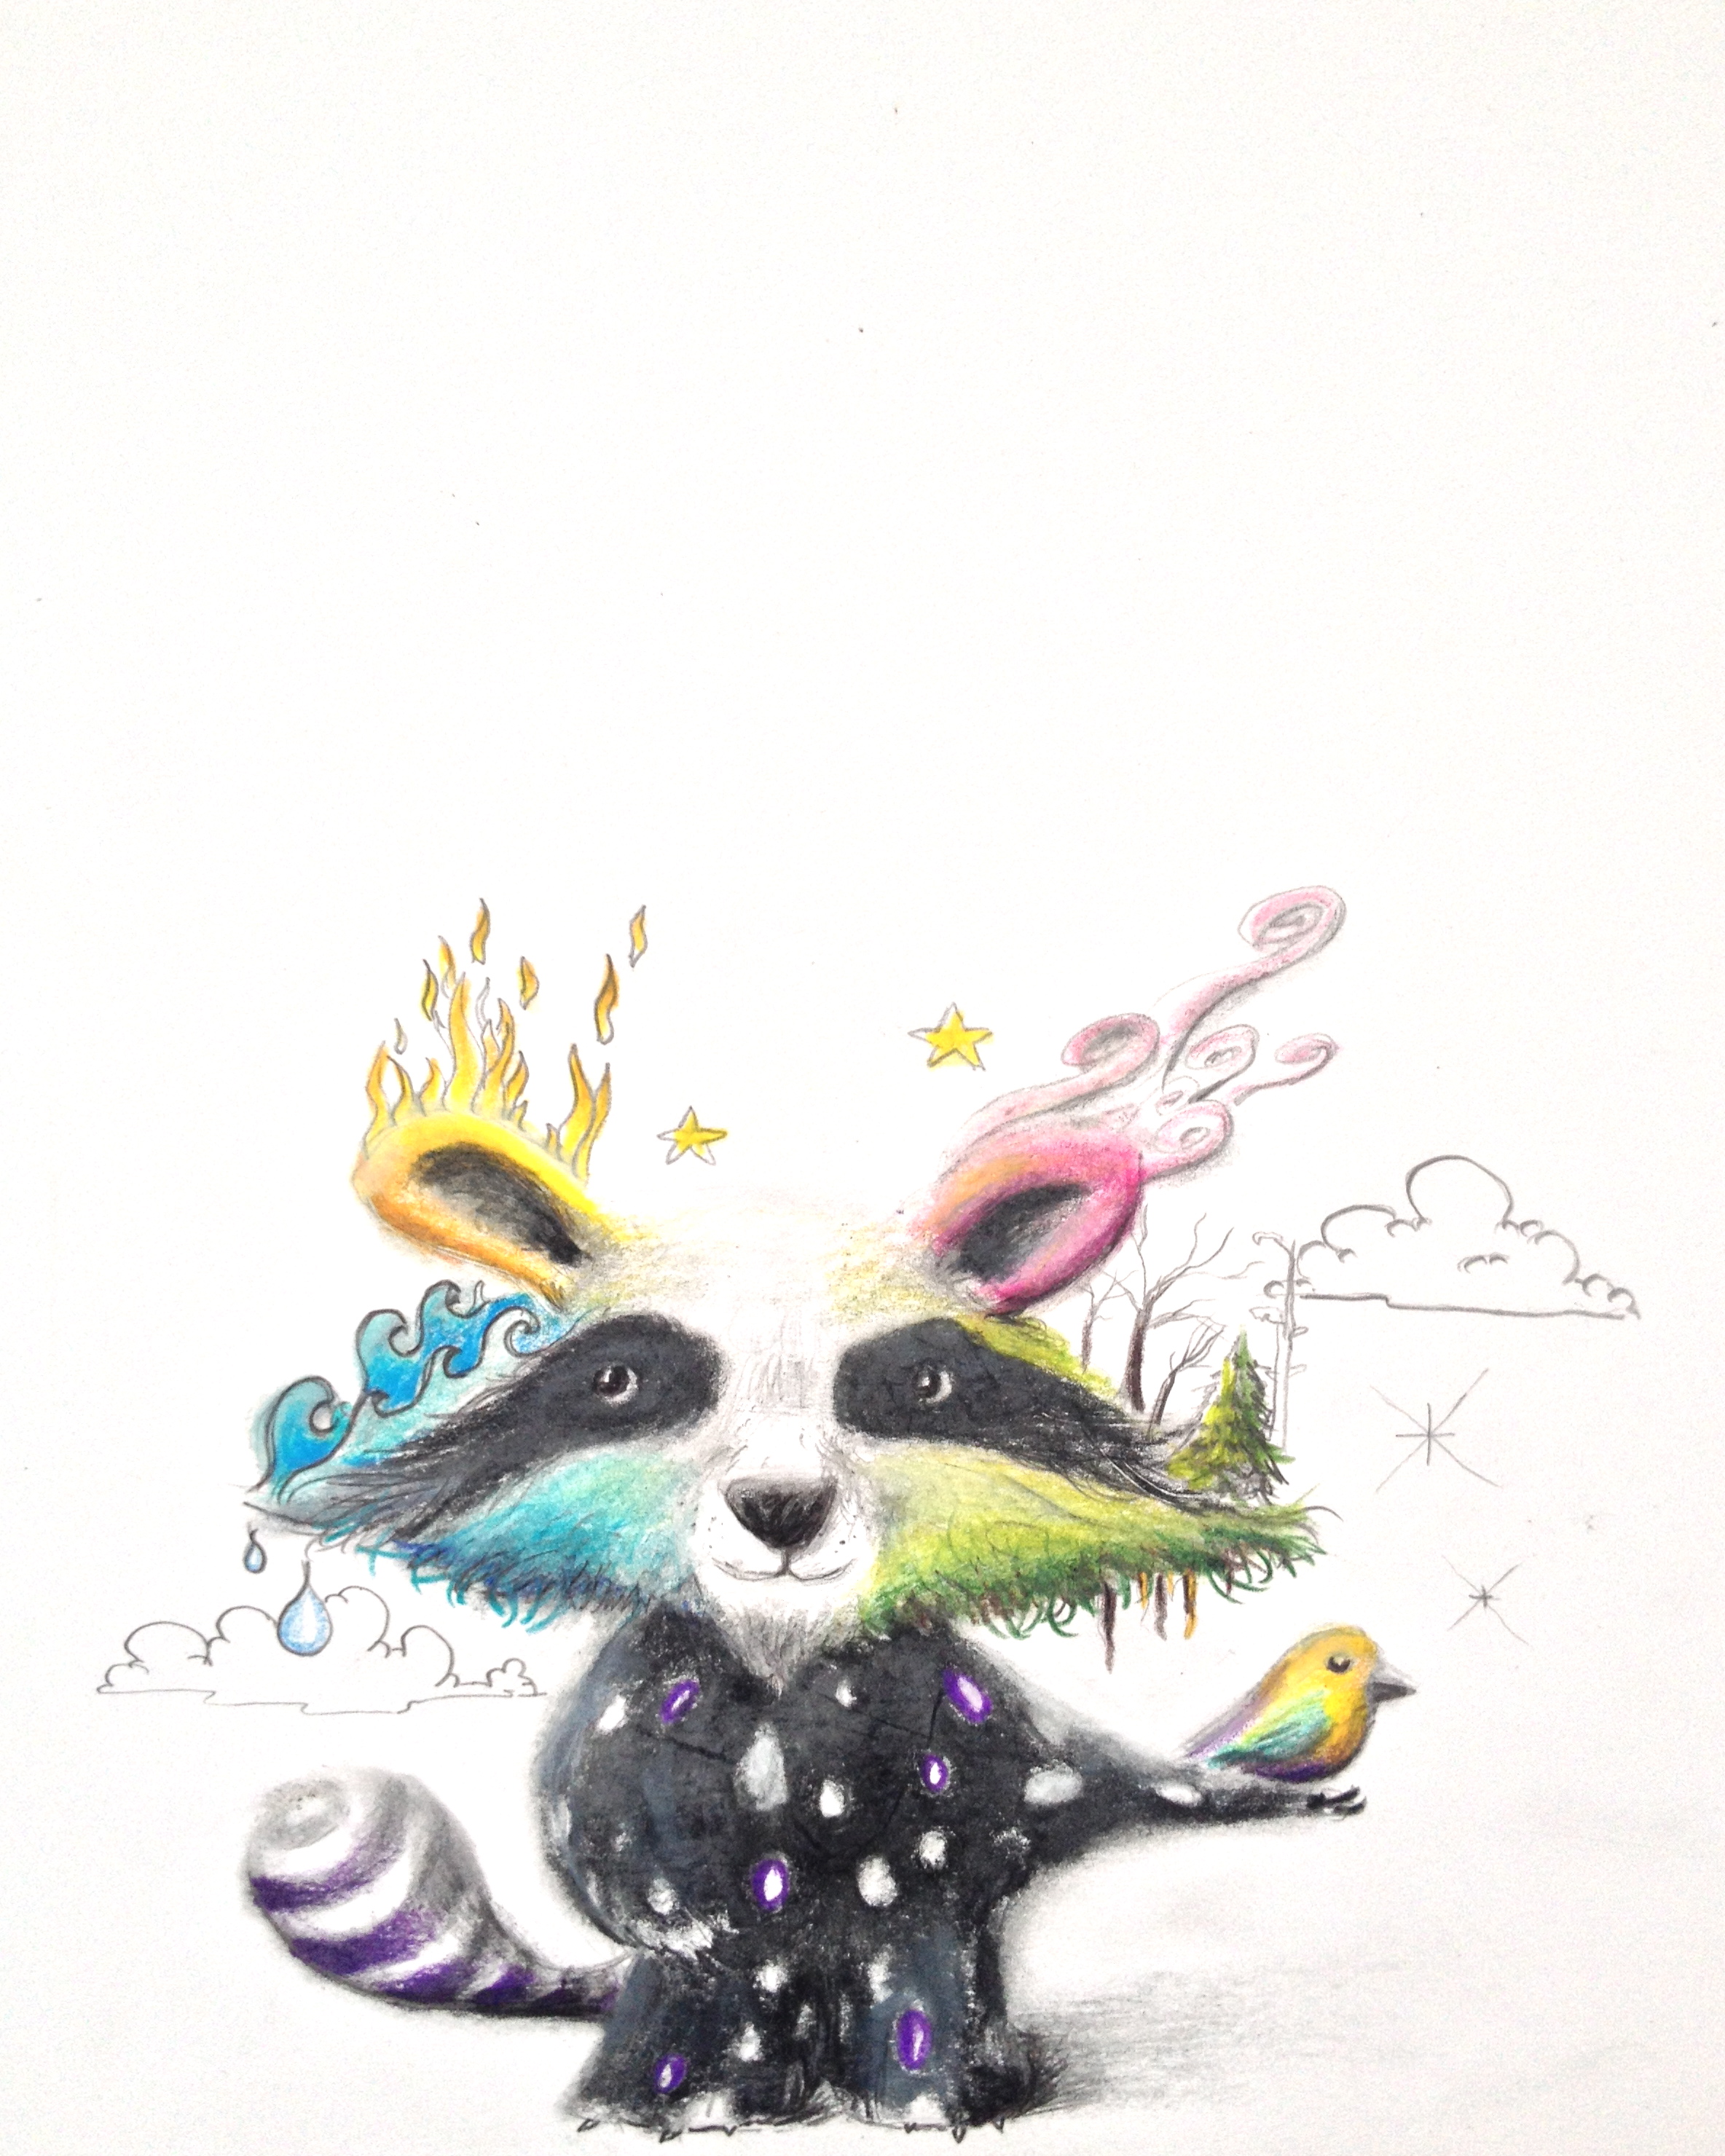 "Elemental Raccoon"  8.5"x11" colored pencil on paper